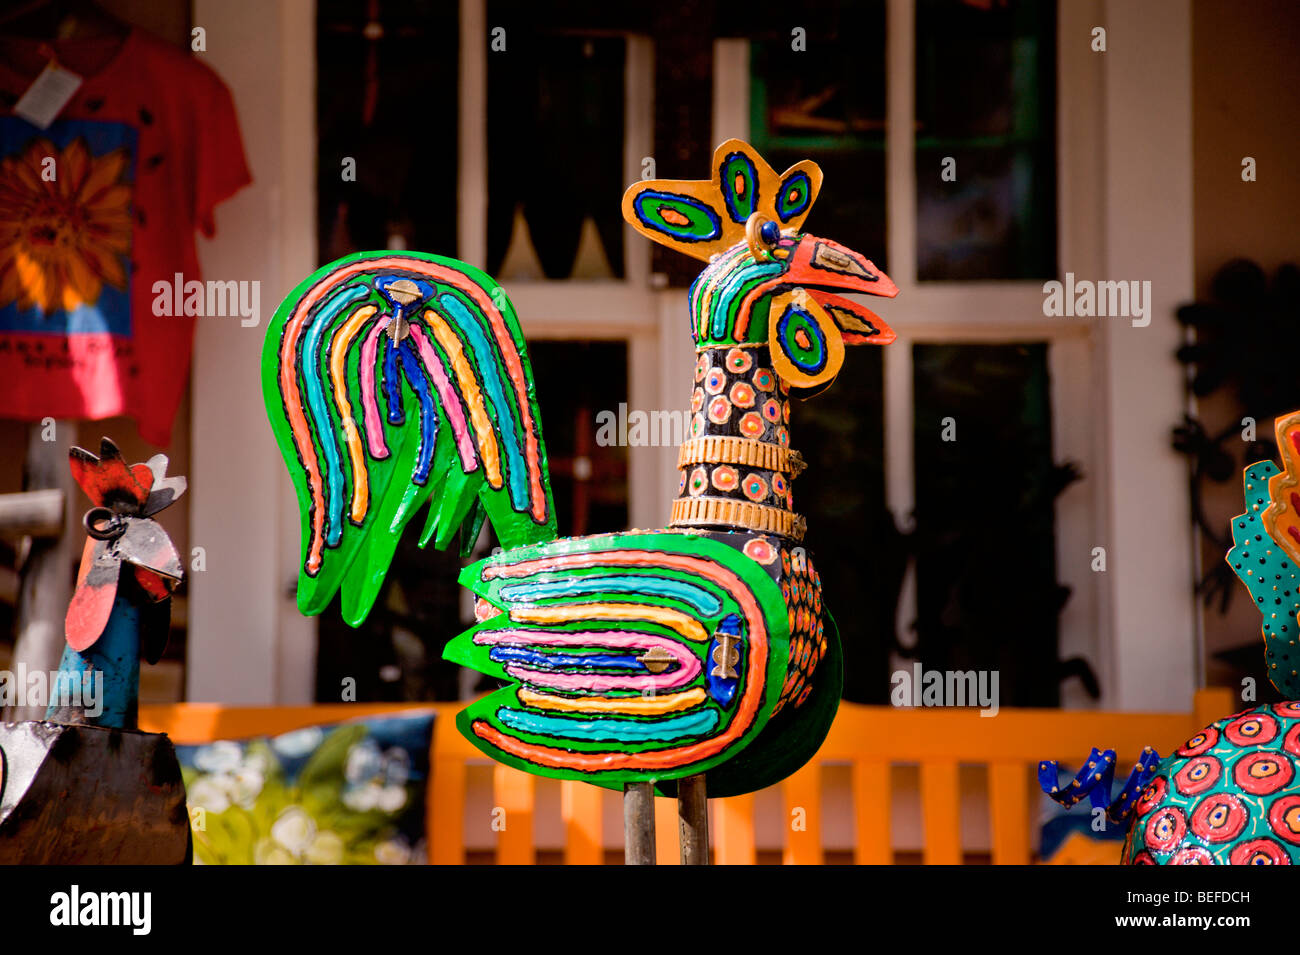 A whimsical sculpture stands in front of an art gallery, in the arts and crafts town of Arroyo Seco, New Mexico. Stock Photo